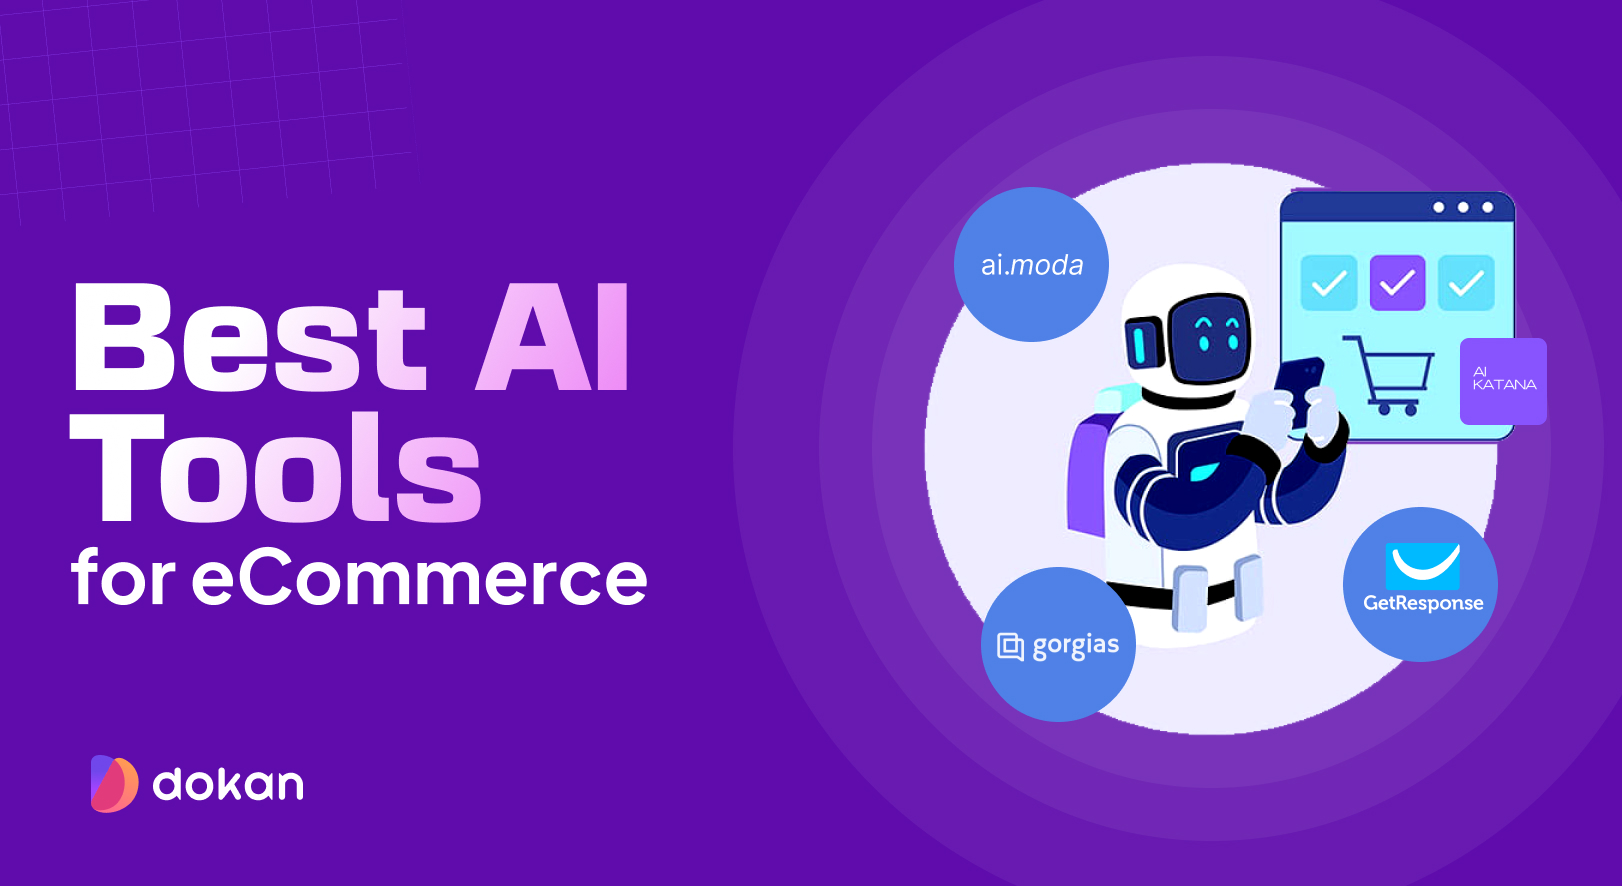 How to Leverage AI Tools to Grow Your Online Business